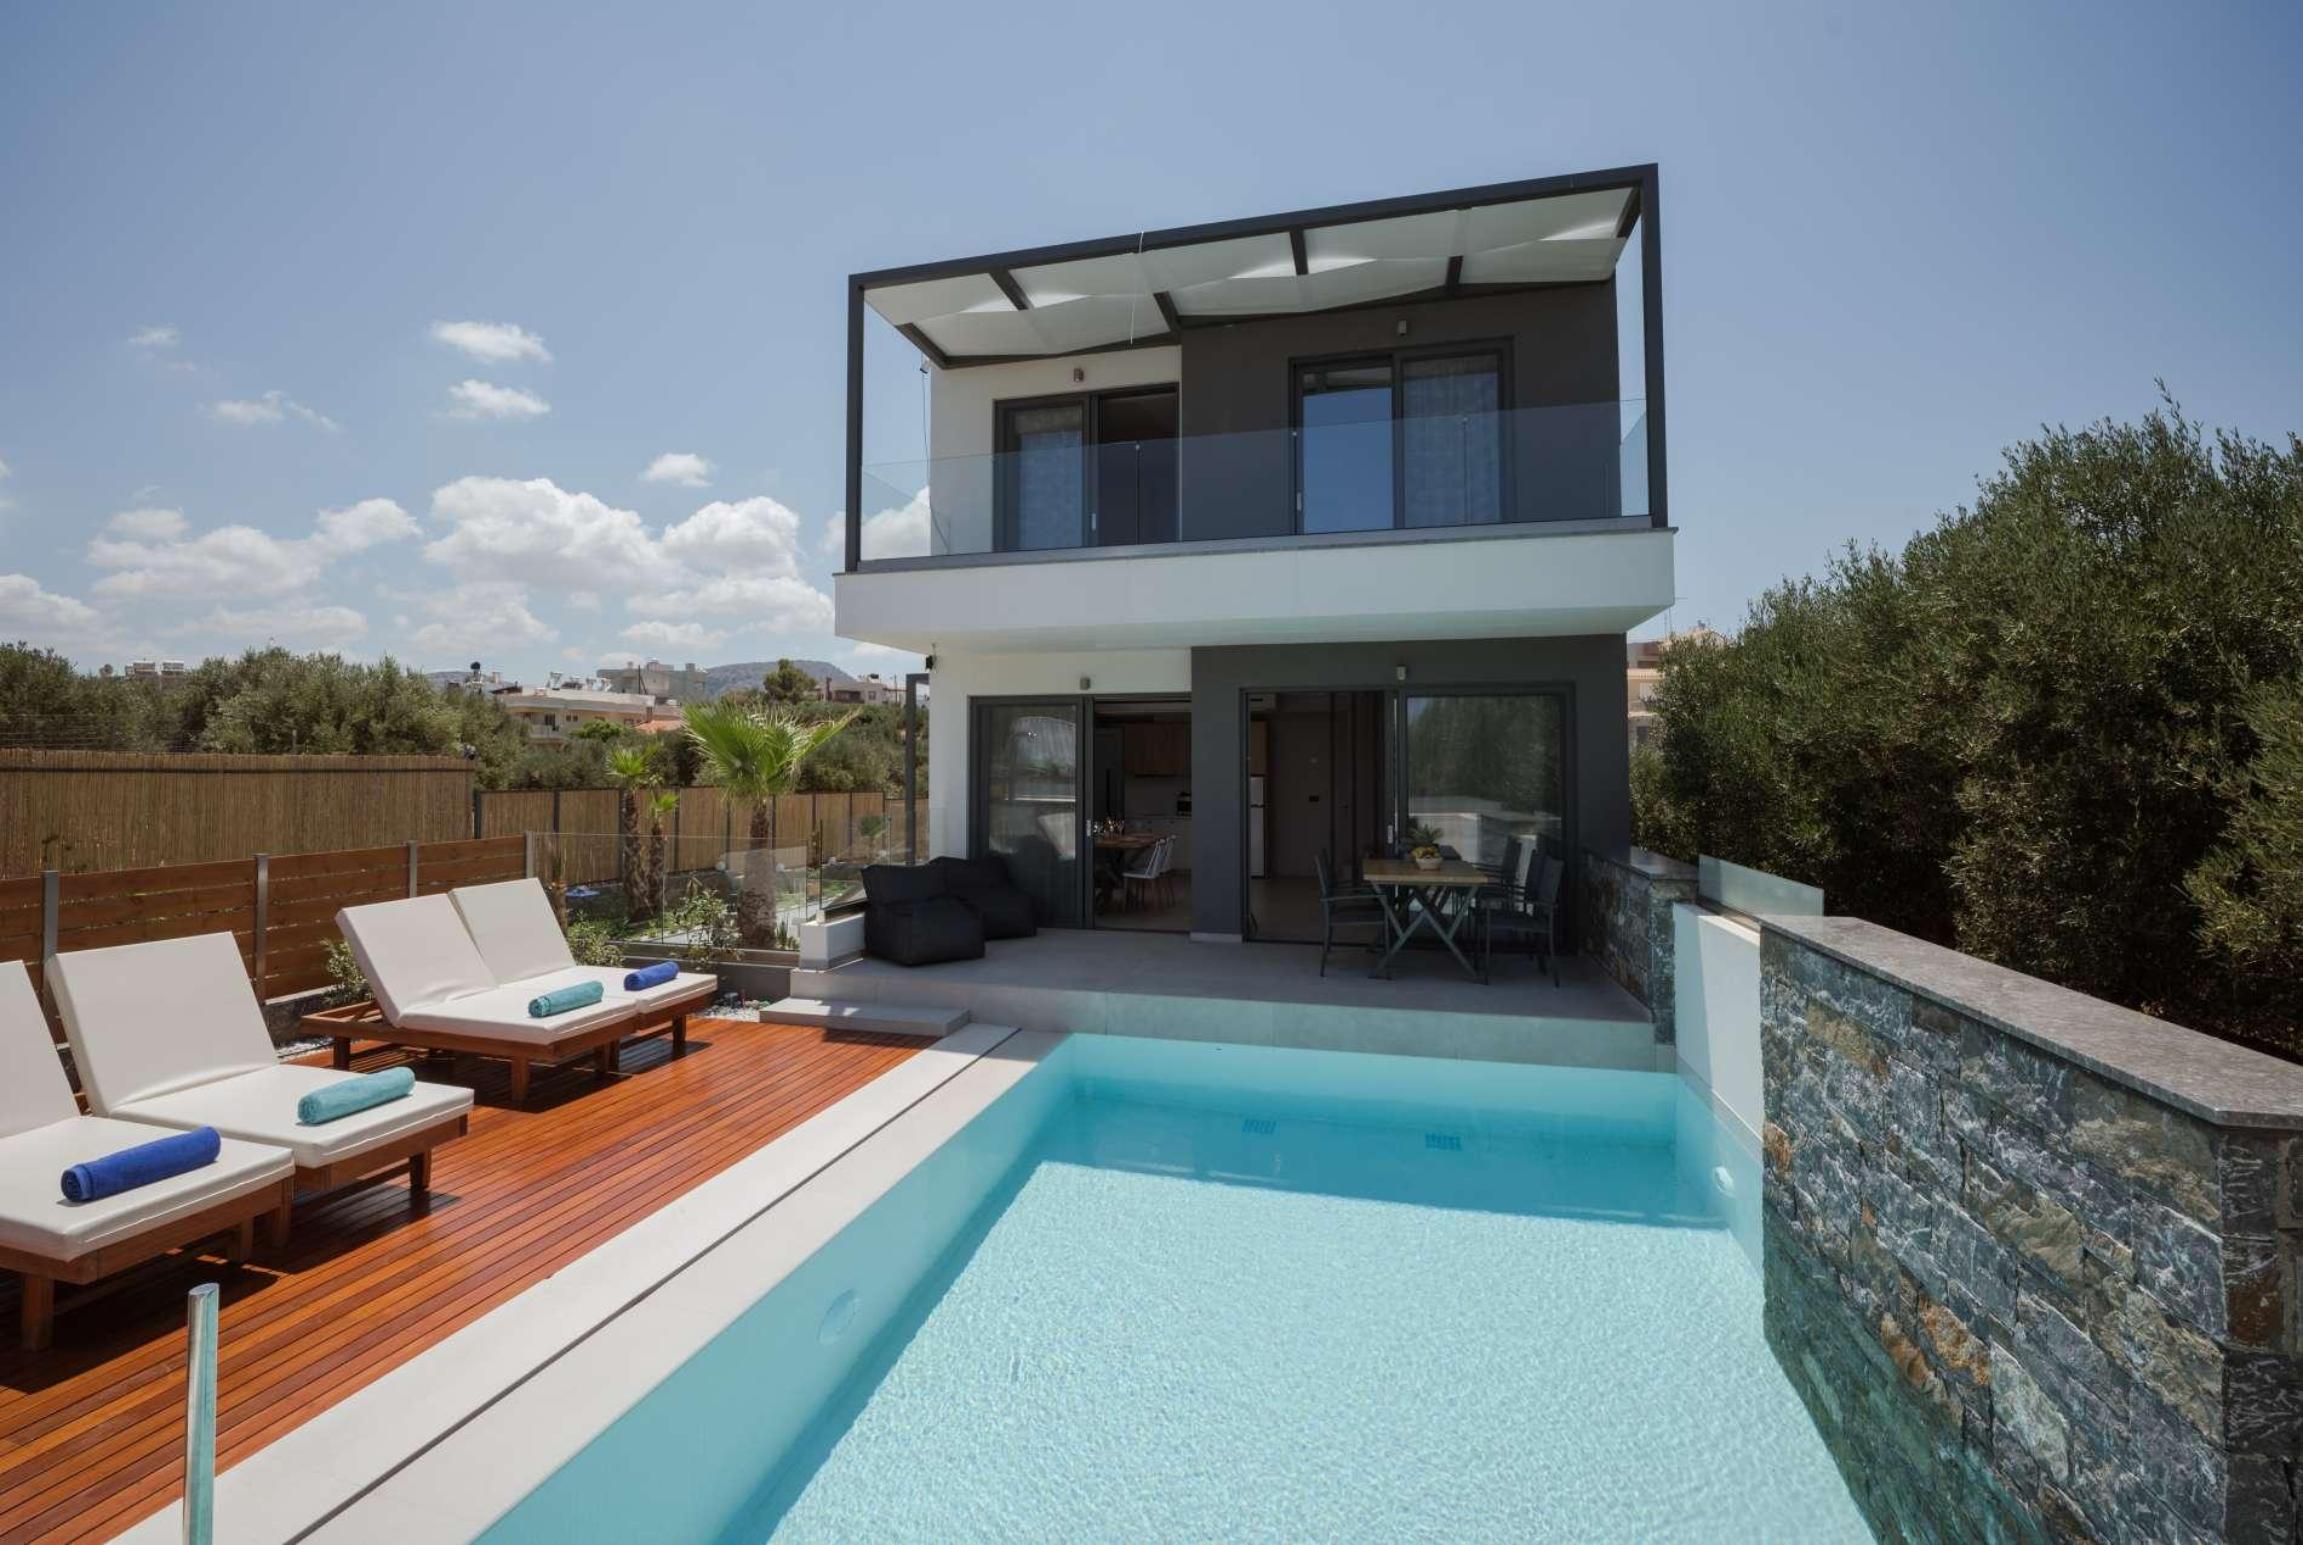 Property Image 1 - 2 bed modern villa with pool.